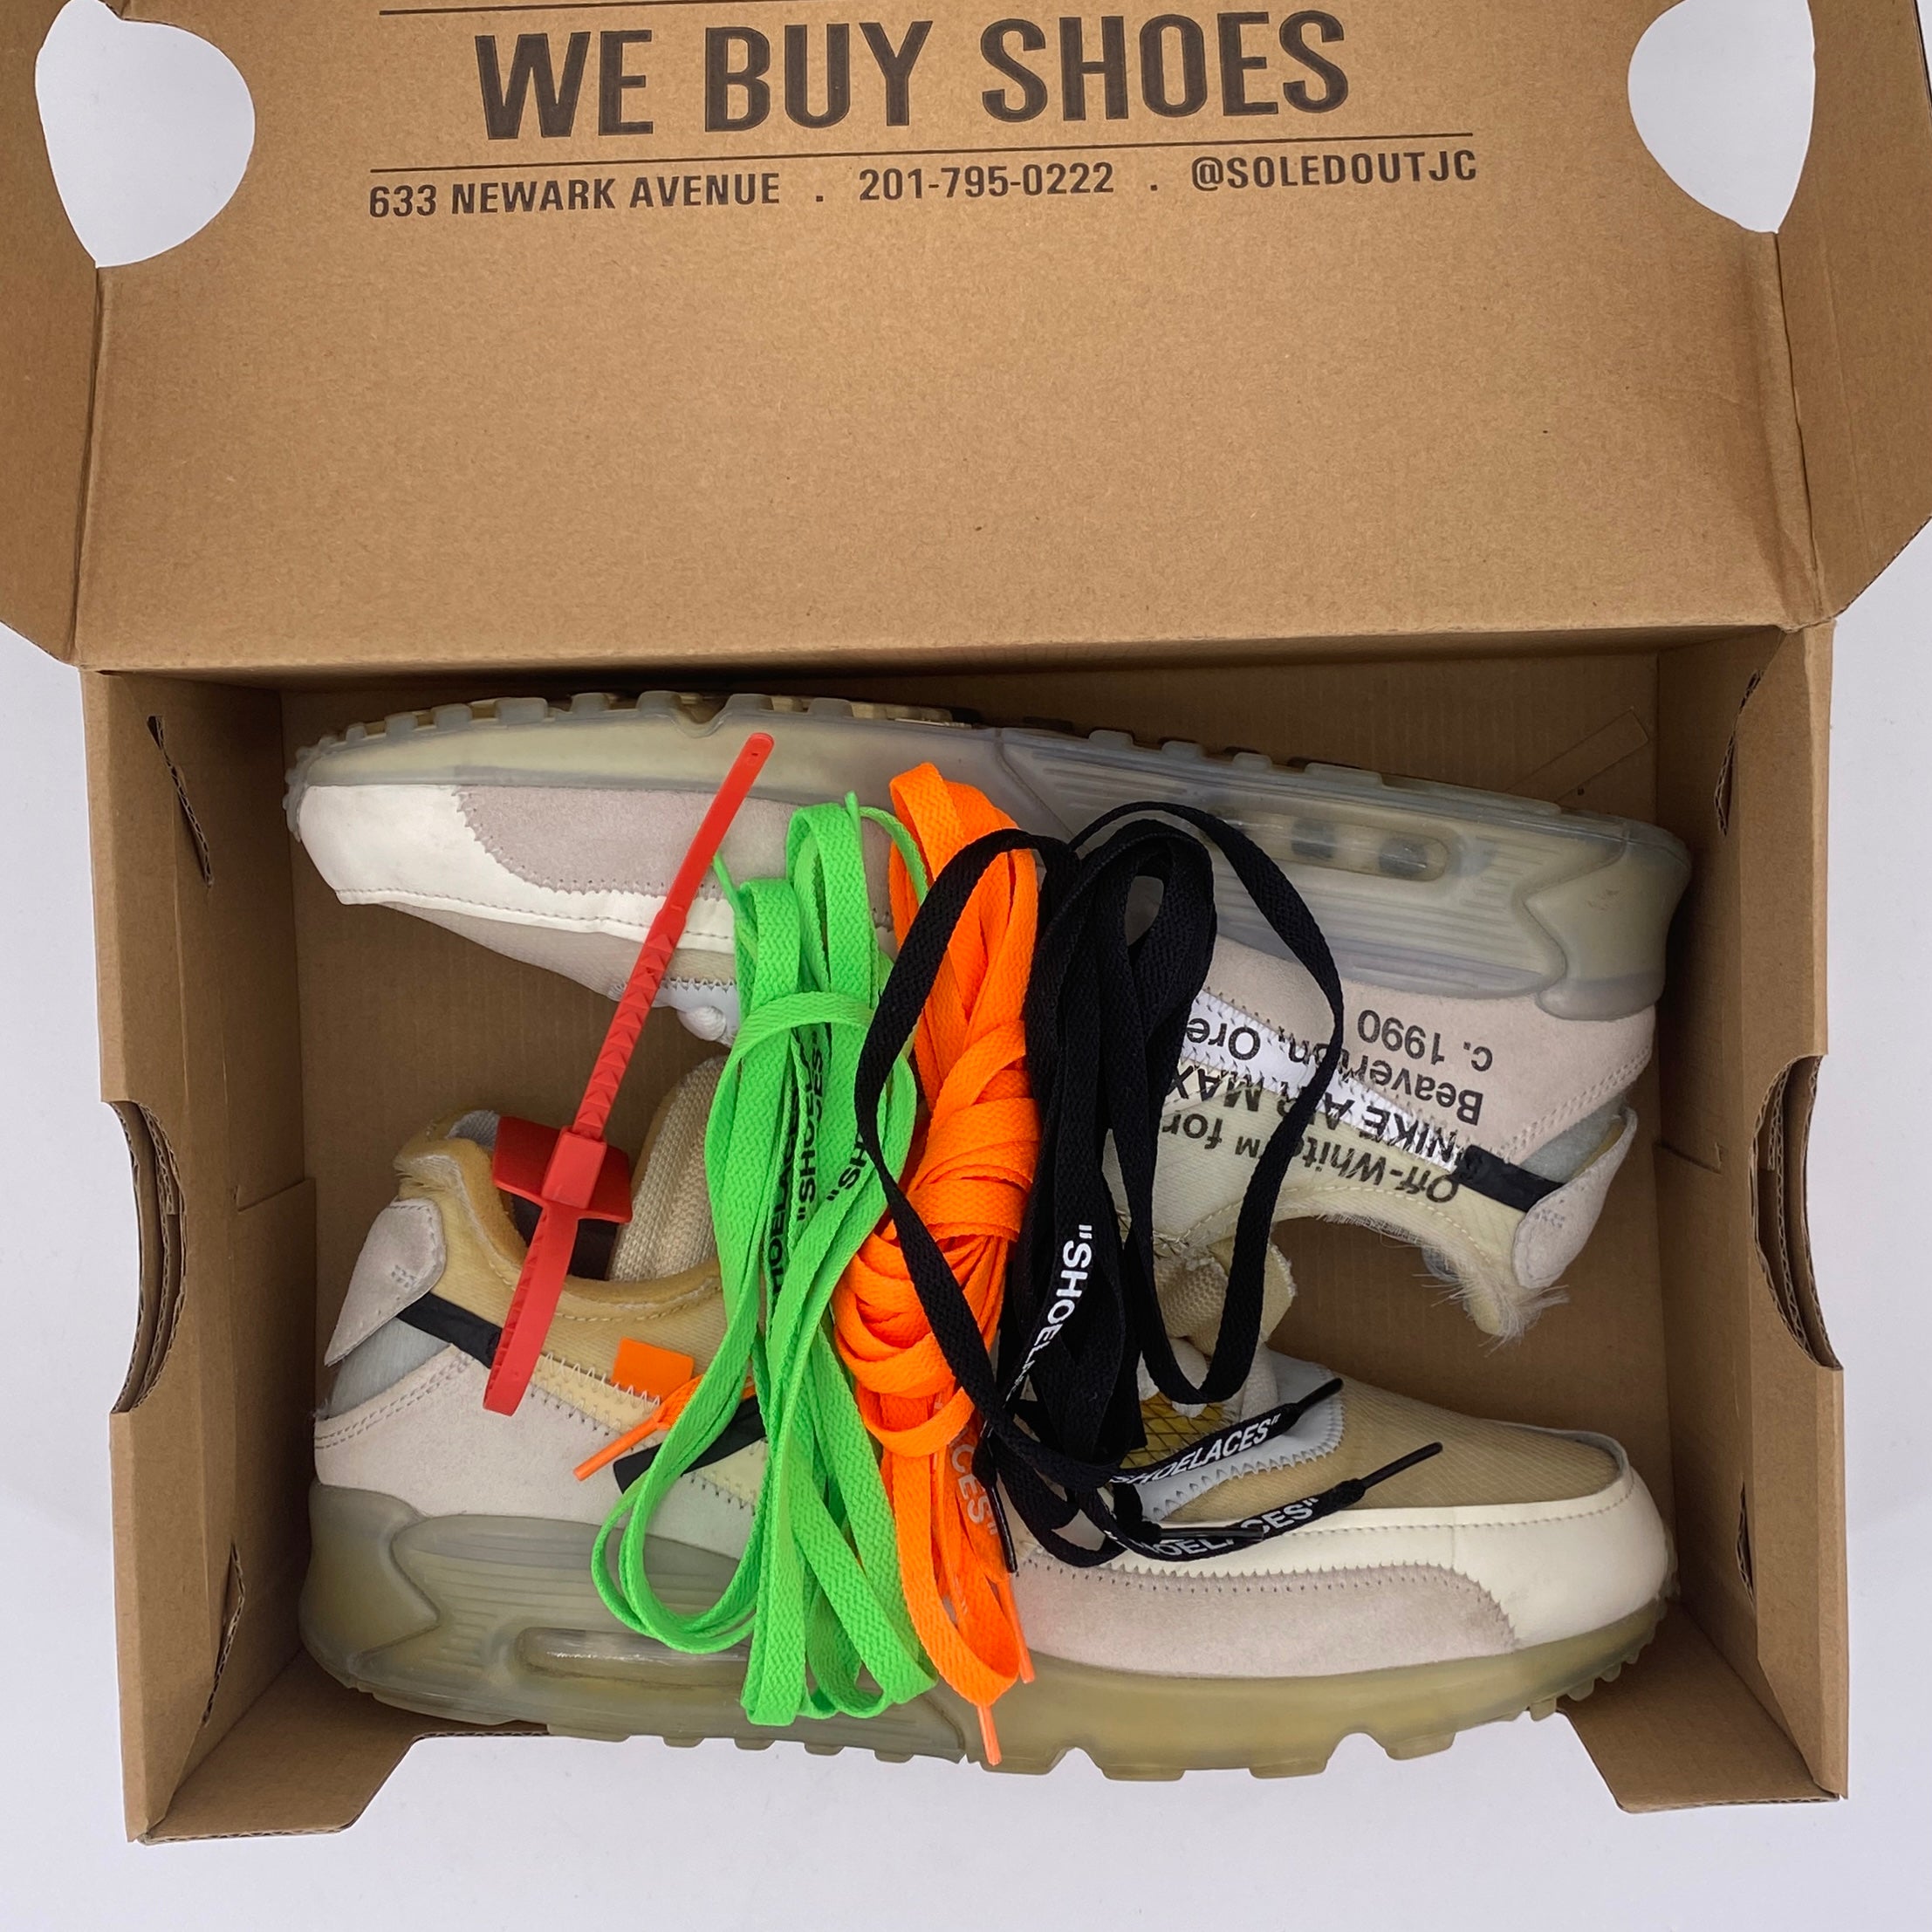 Nike Air Max 90 / OW &quot;THE 10: OFF-WHITE&quot; 2017 Used Size 10.5